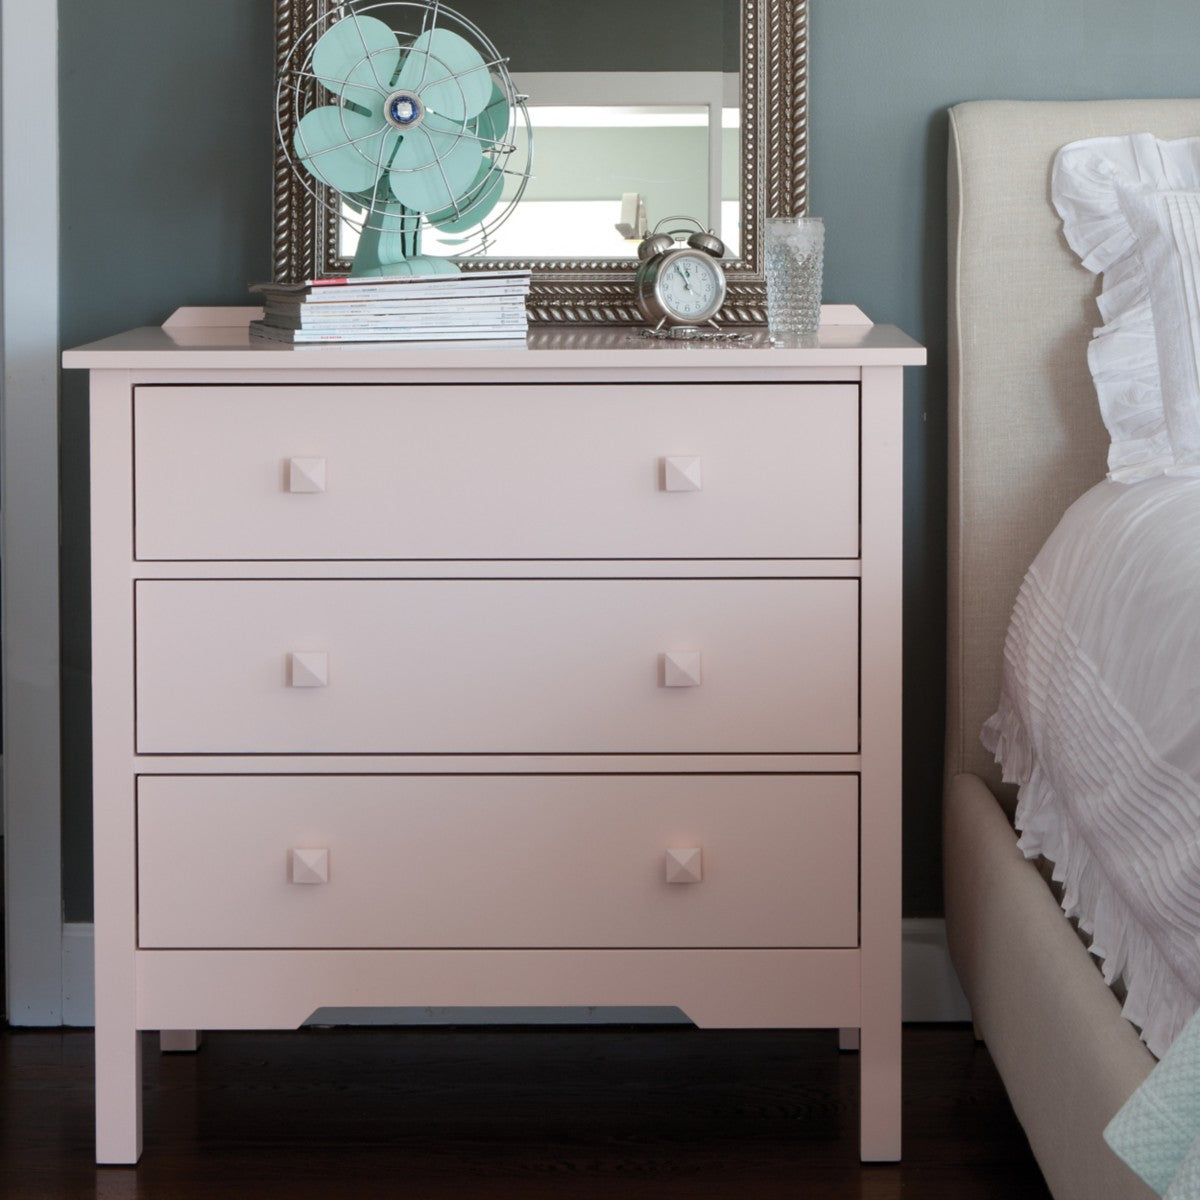 Maine Cottage Bay 3-Drawer Dresser by Maine Cottage | Where Color Lives 